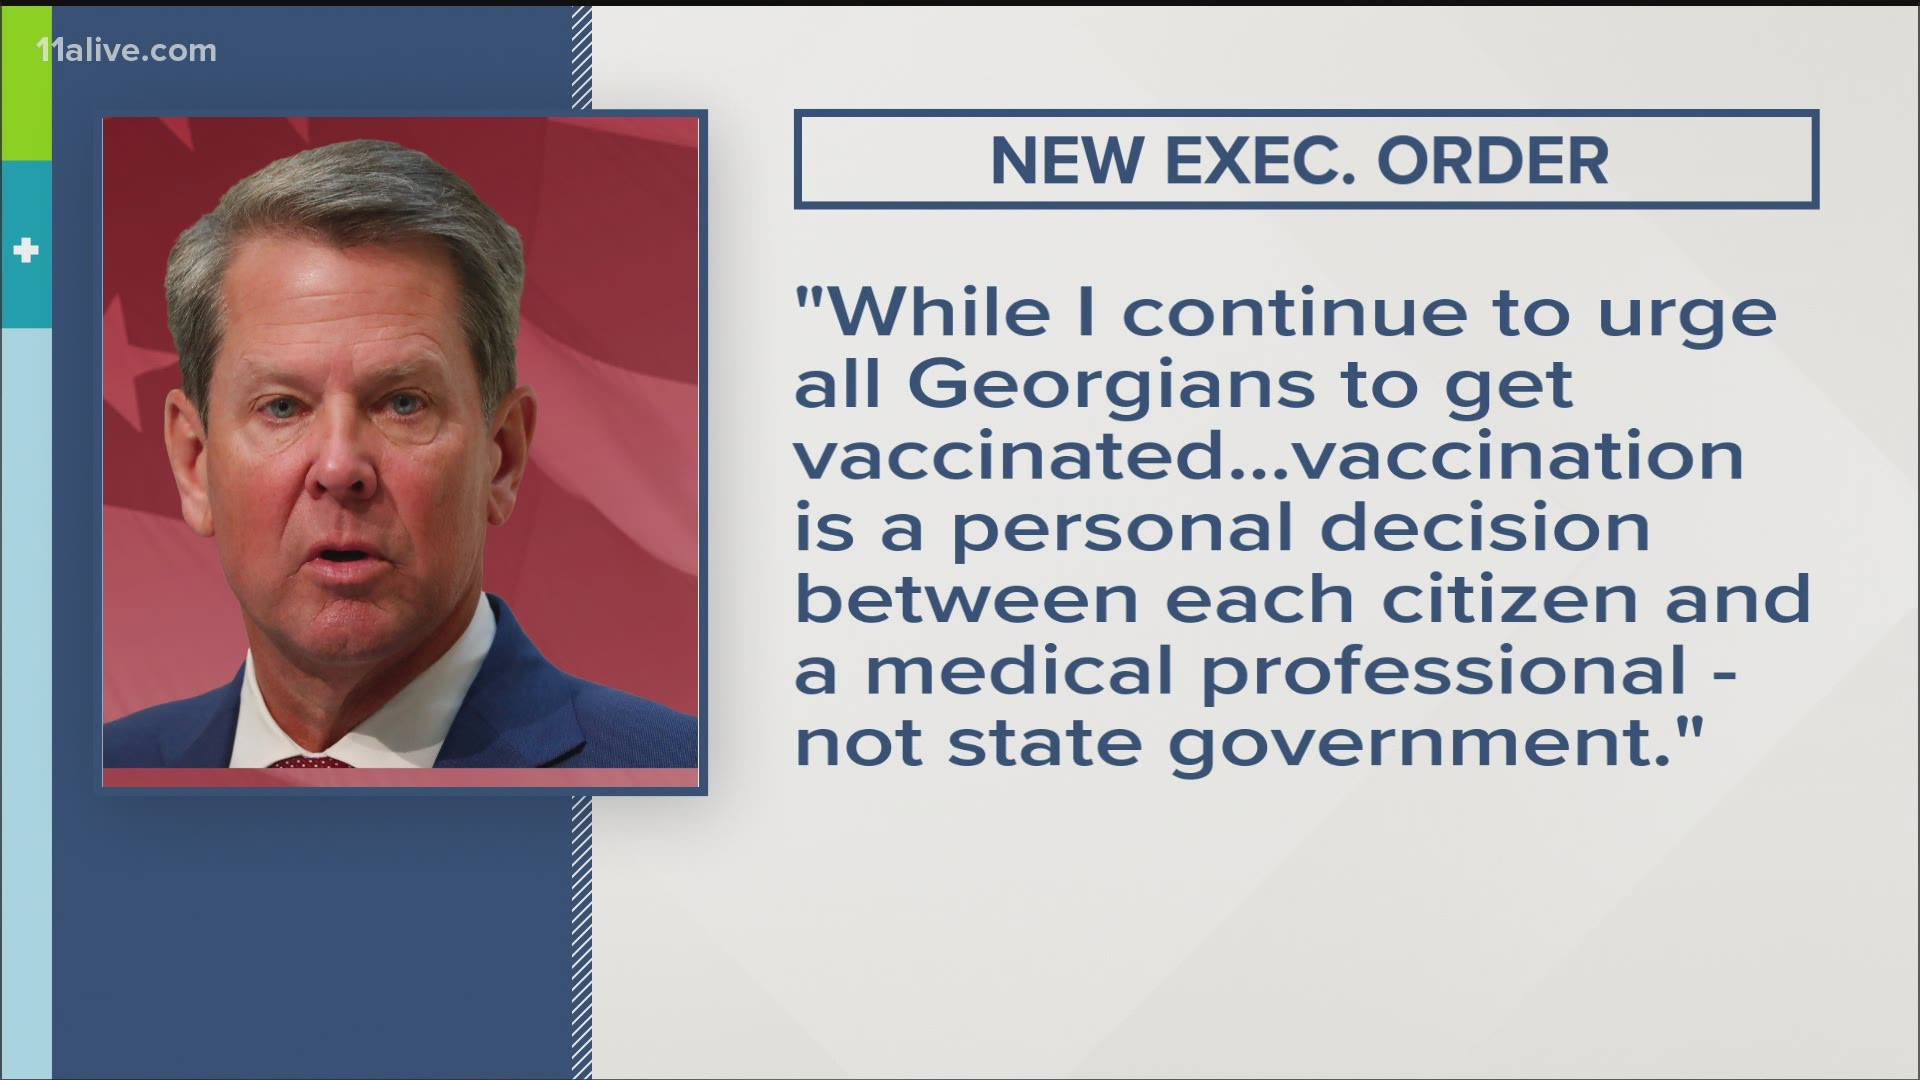 Gov. Kemp issued an executive order prohibiting state agencies, service providers and properties from requiring COVID-19 vaccine passports.